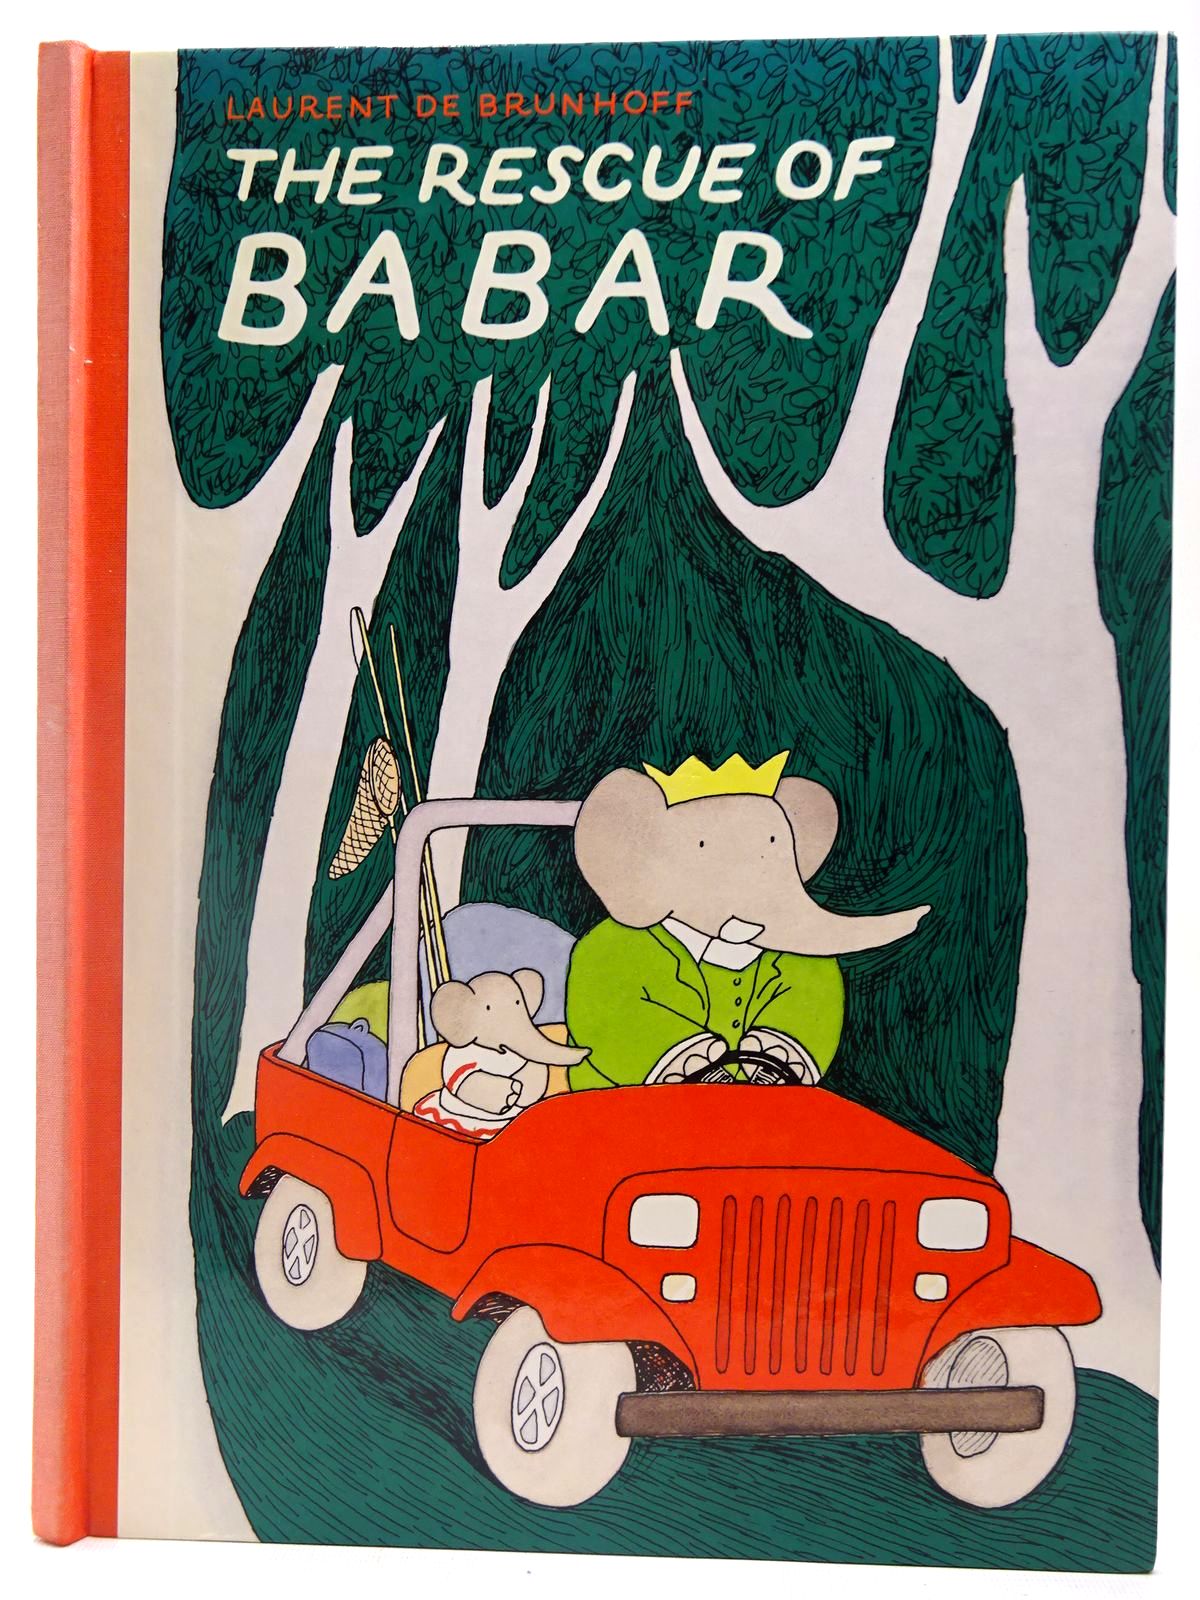 Photo of THE RESCUE OF BABAR written by De Brunhoff, Laurent illustrated by De Brunhoff, Laurent published by Methuen Children's Books Ltd. (STOCK CODE: 2127384)  for sale by Stella & Rose's Books